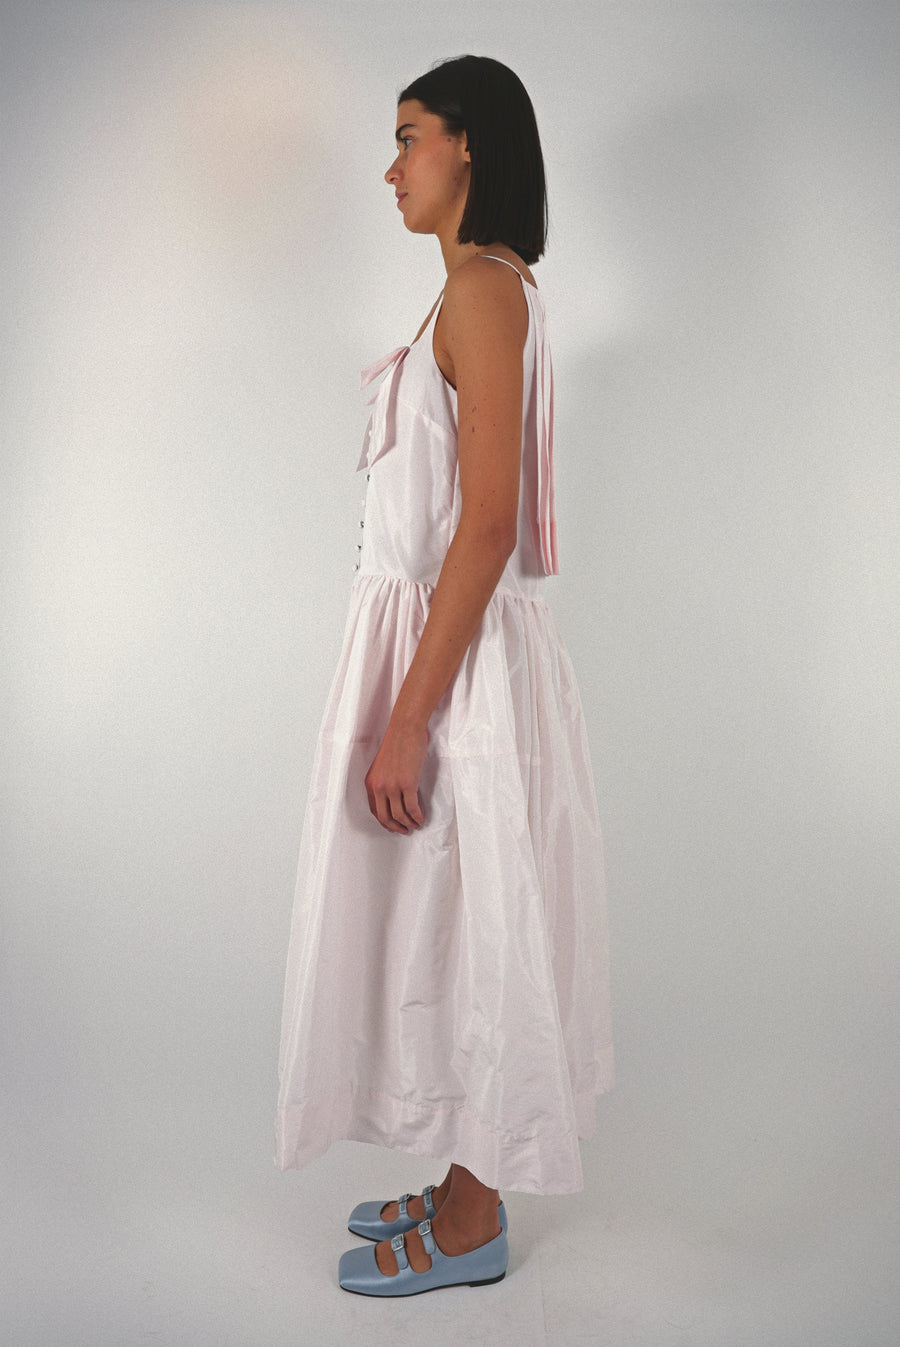 Midi length dress in blush pink taffeta with buttons and cape detail at back on model